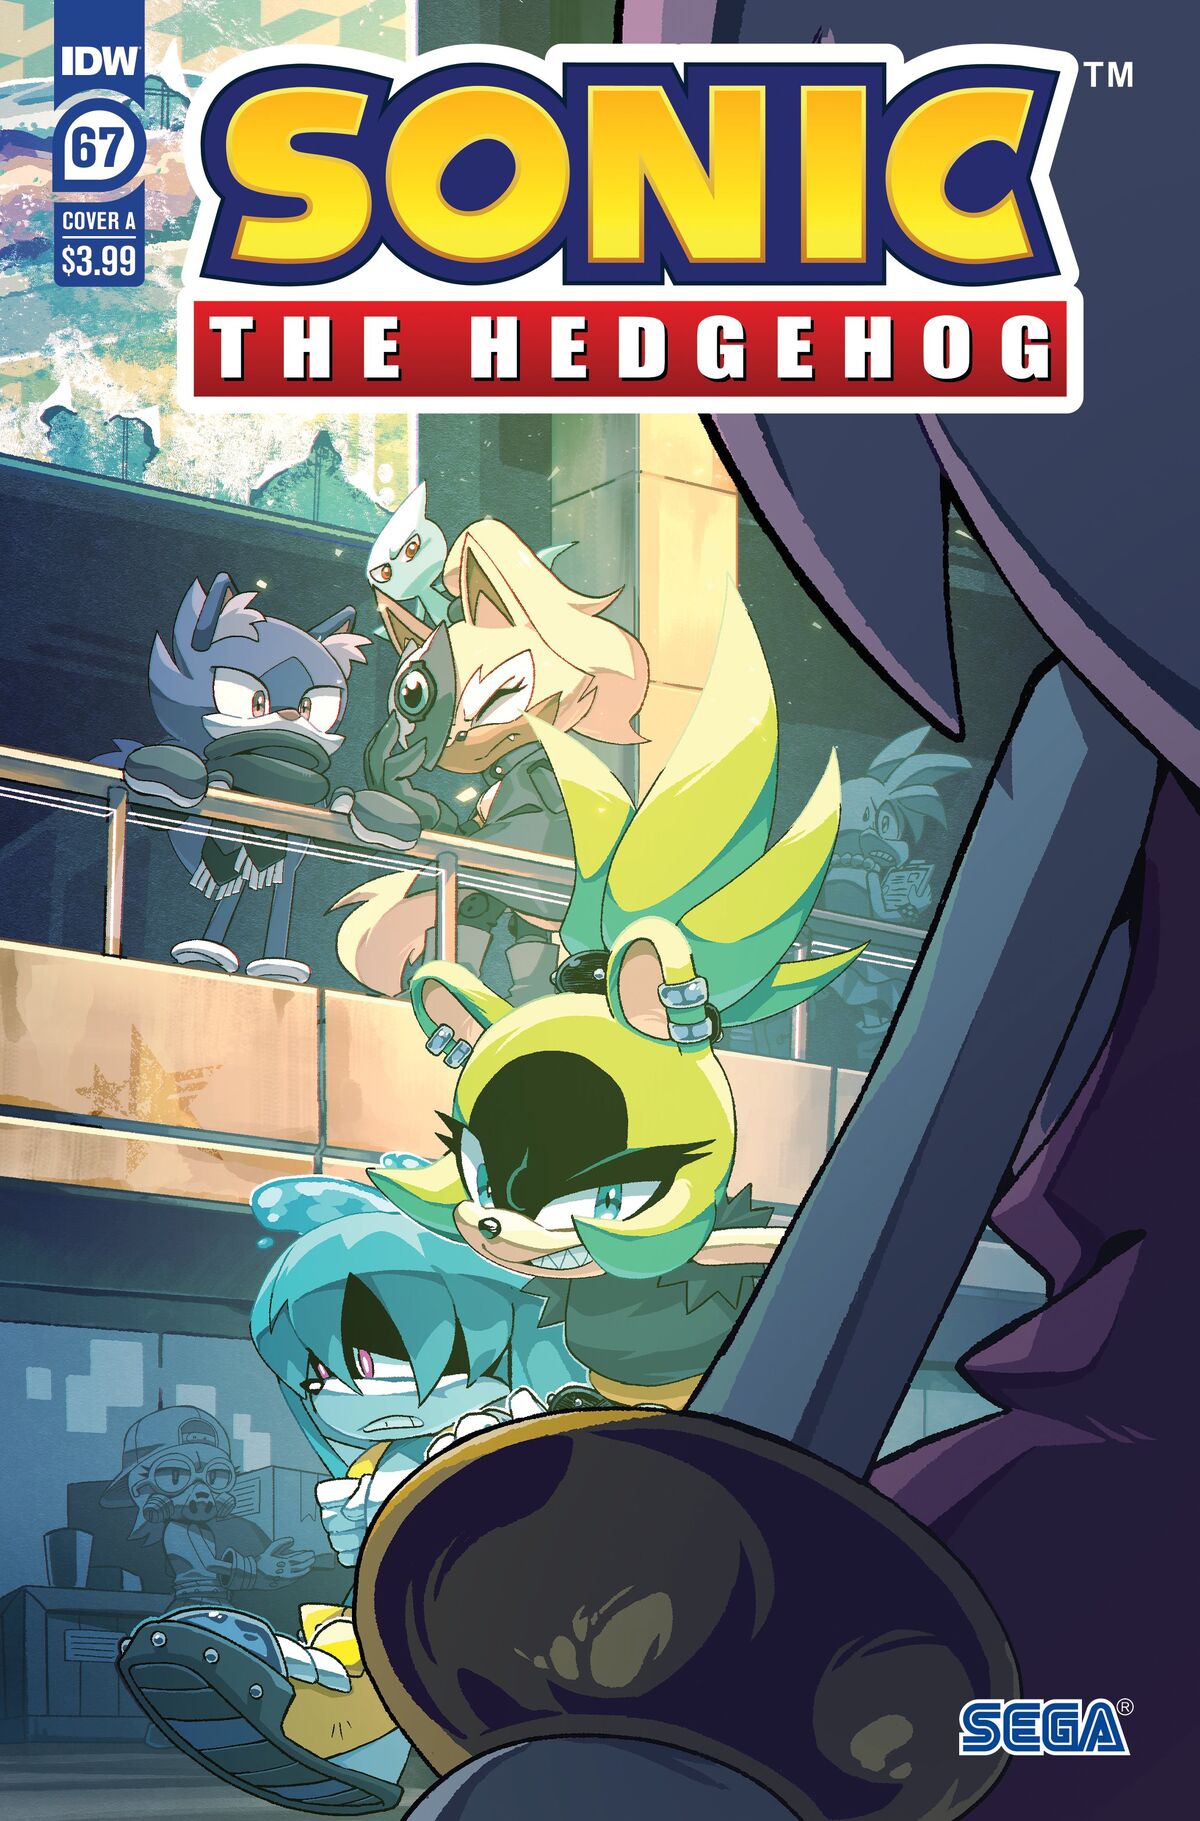 They won't stop making these new Sonic movie 2 poster : r/SonicTheHedgehog